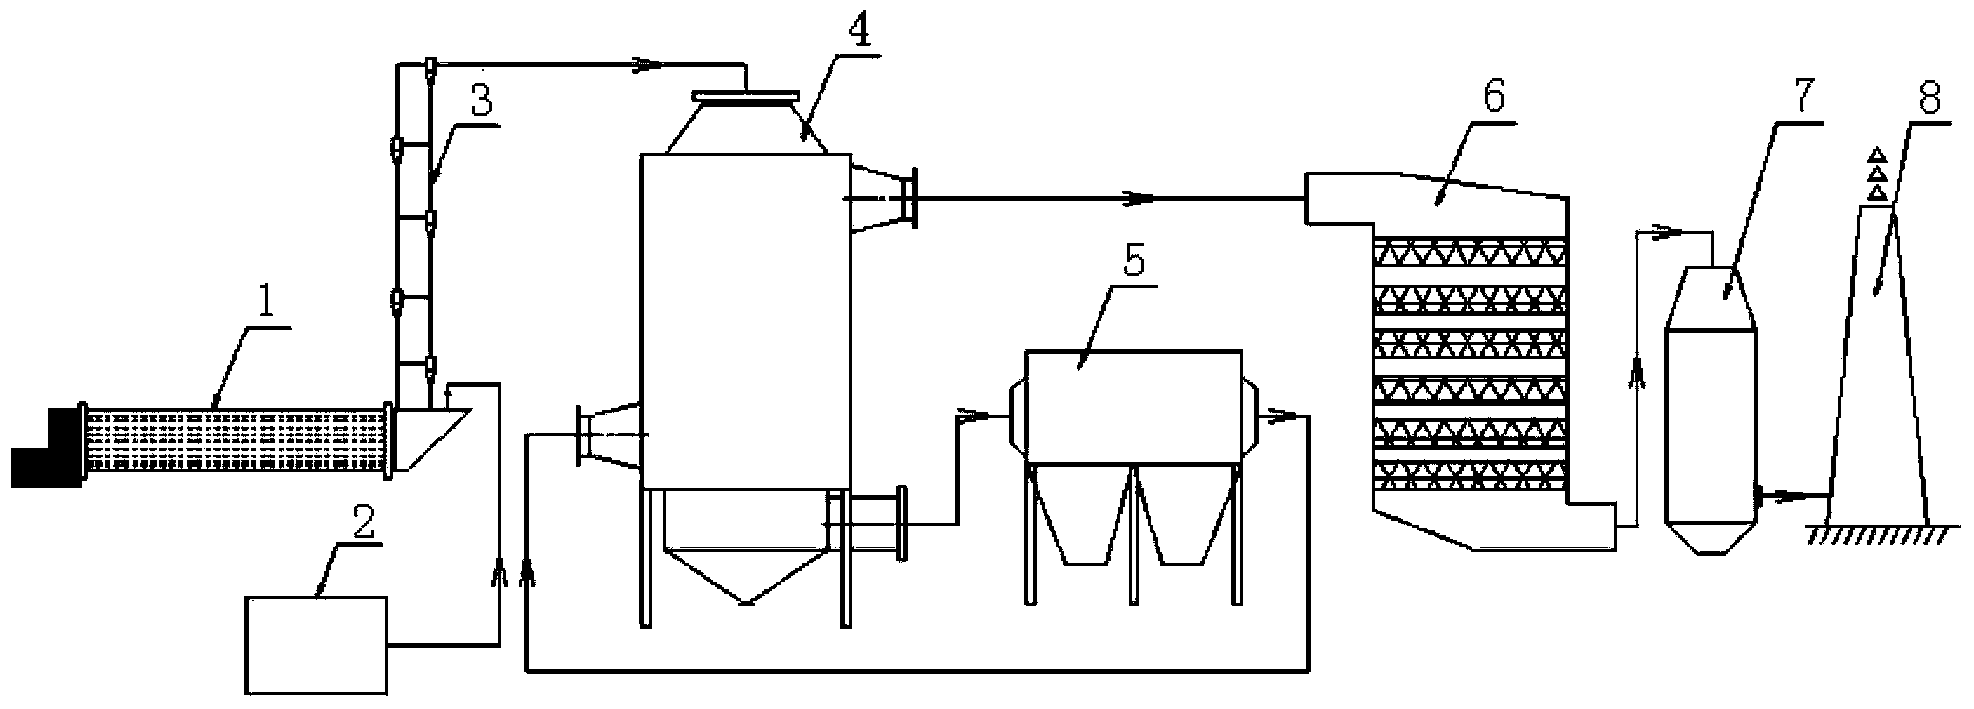 SCR (Selective Catalytic Reduction) denitration device for NOx control of rotary cement kiln